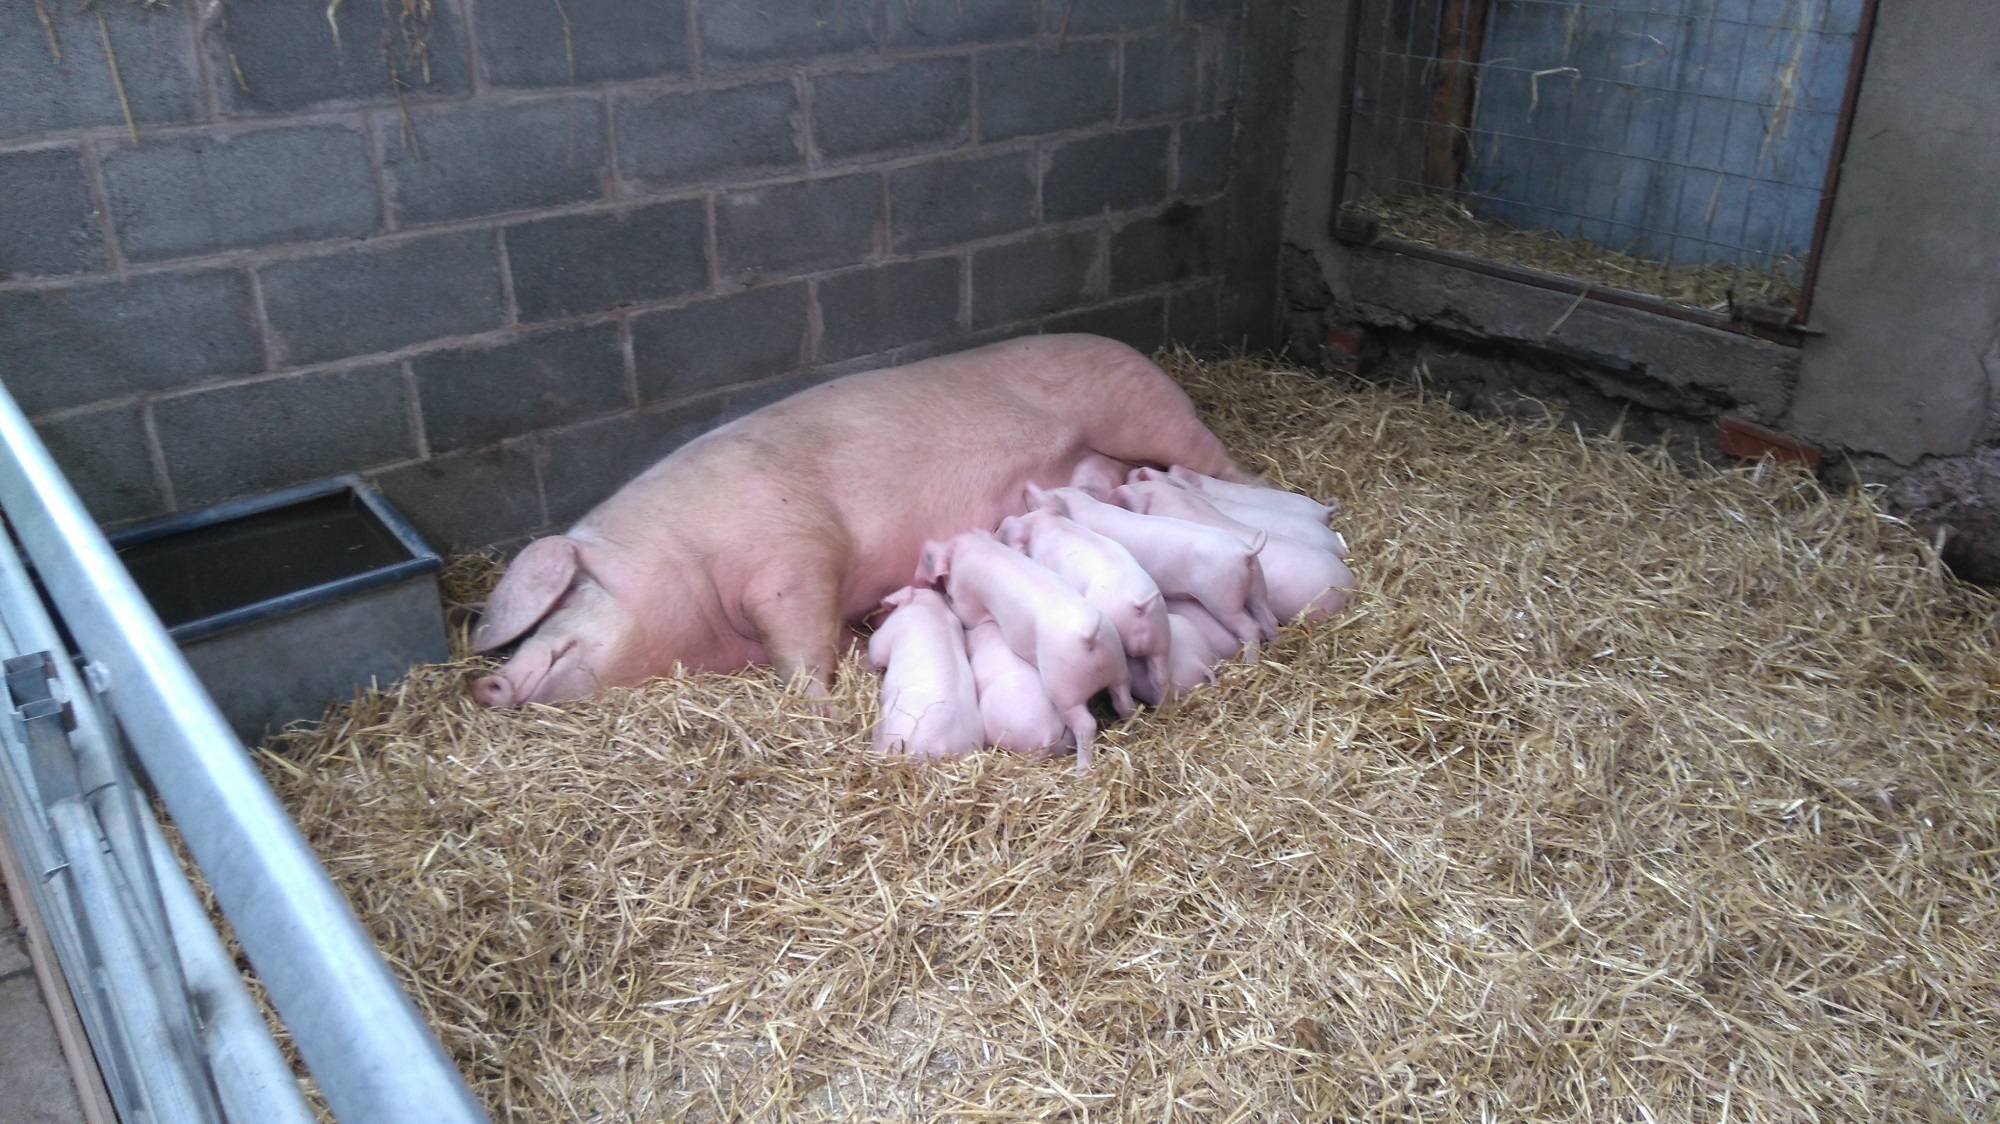 A set of piglets suckle from their mother in a straw filled stall